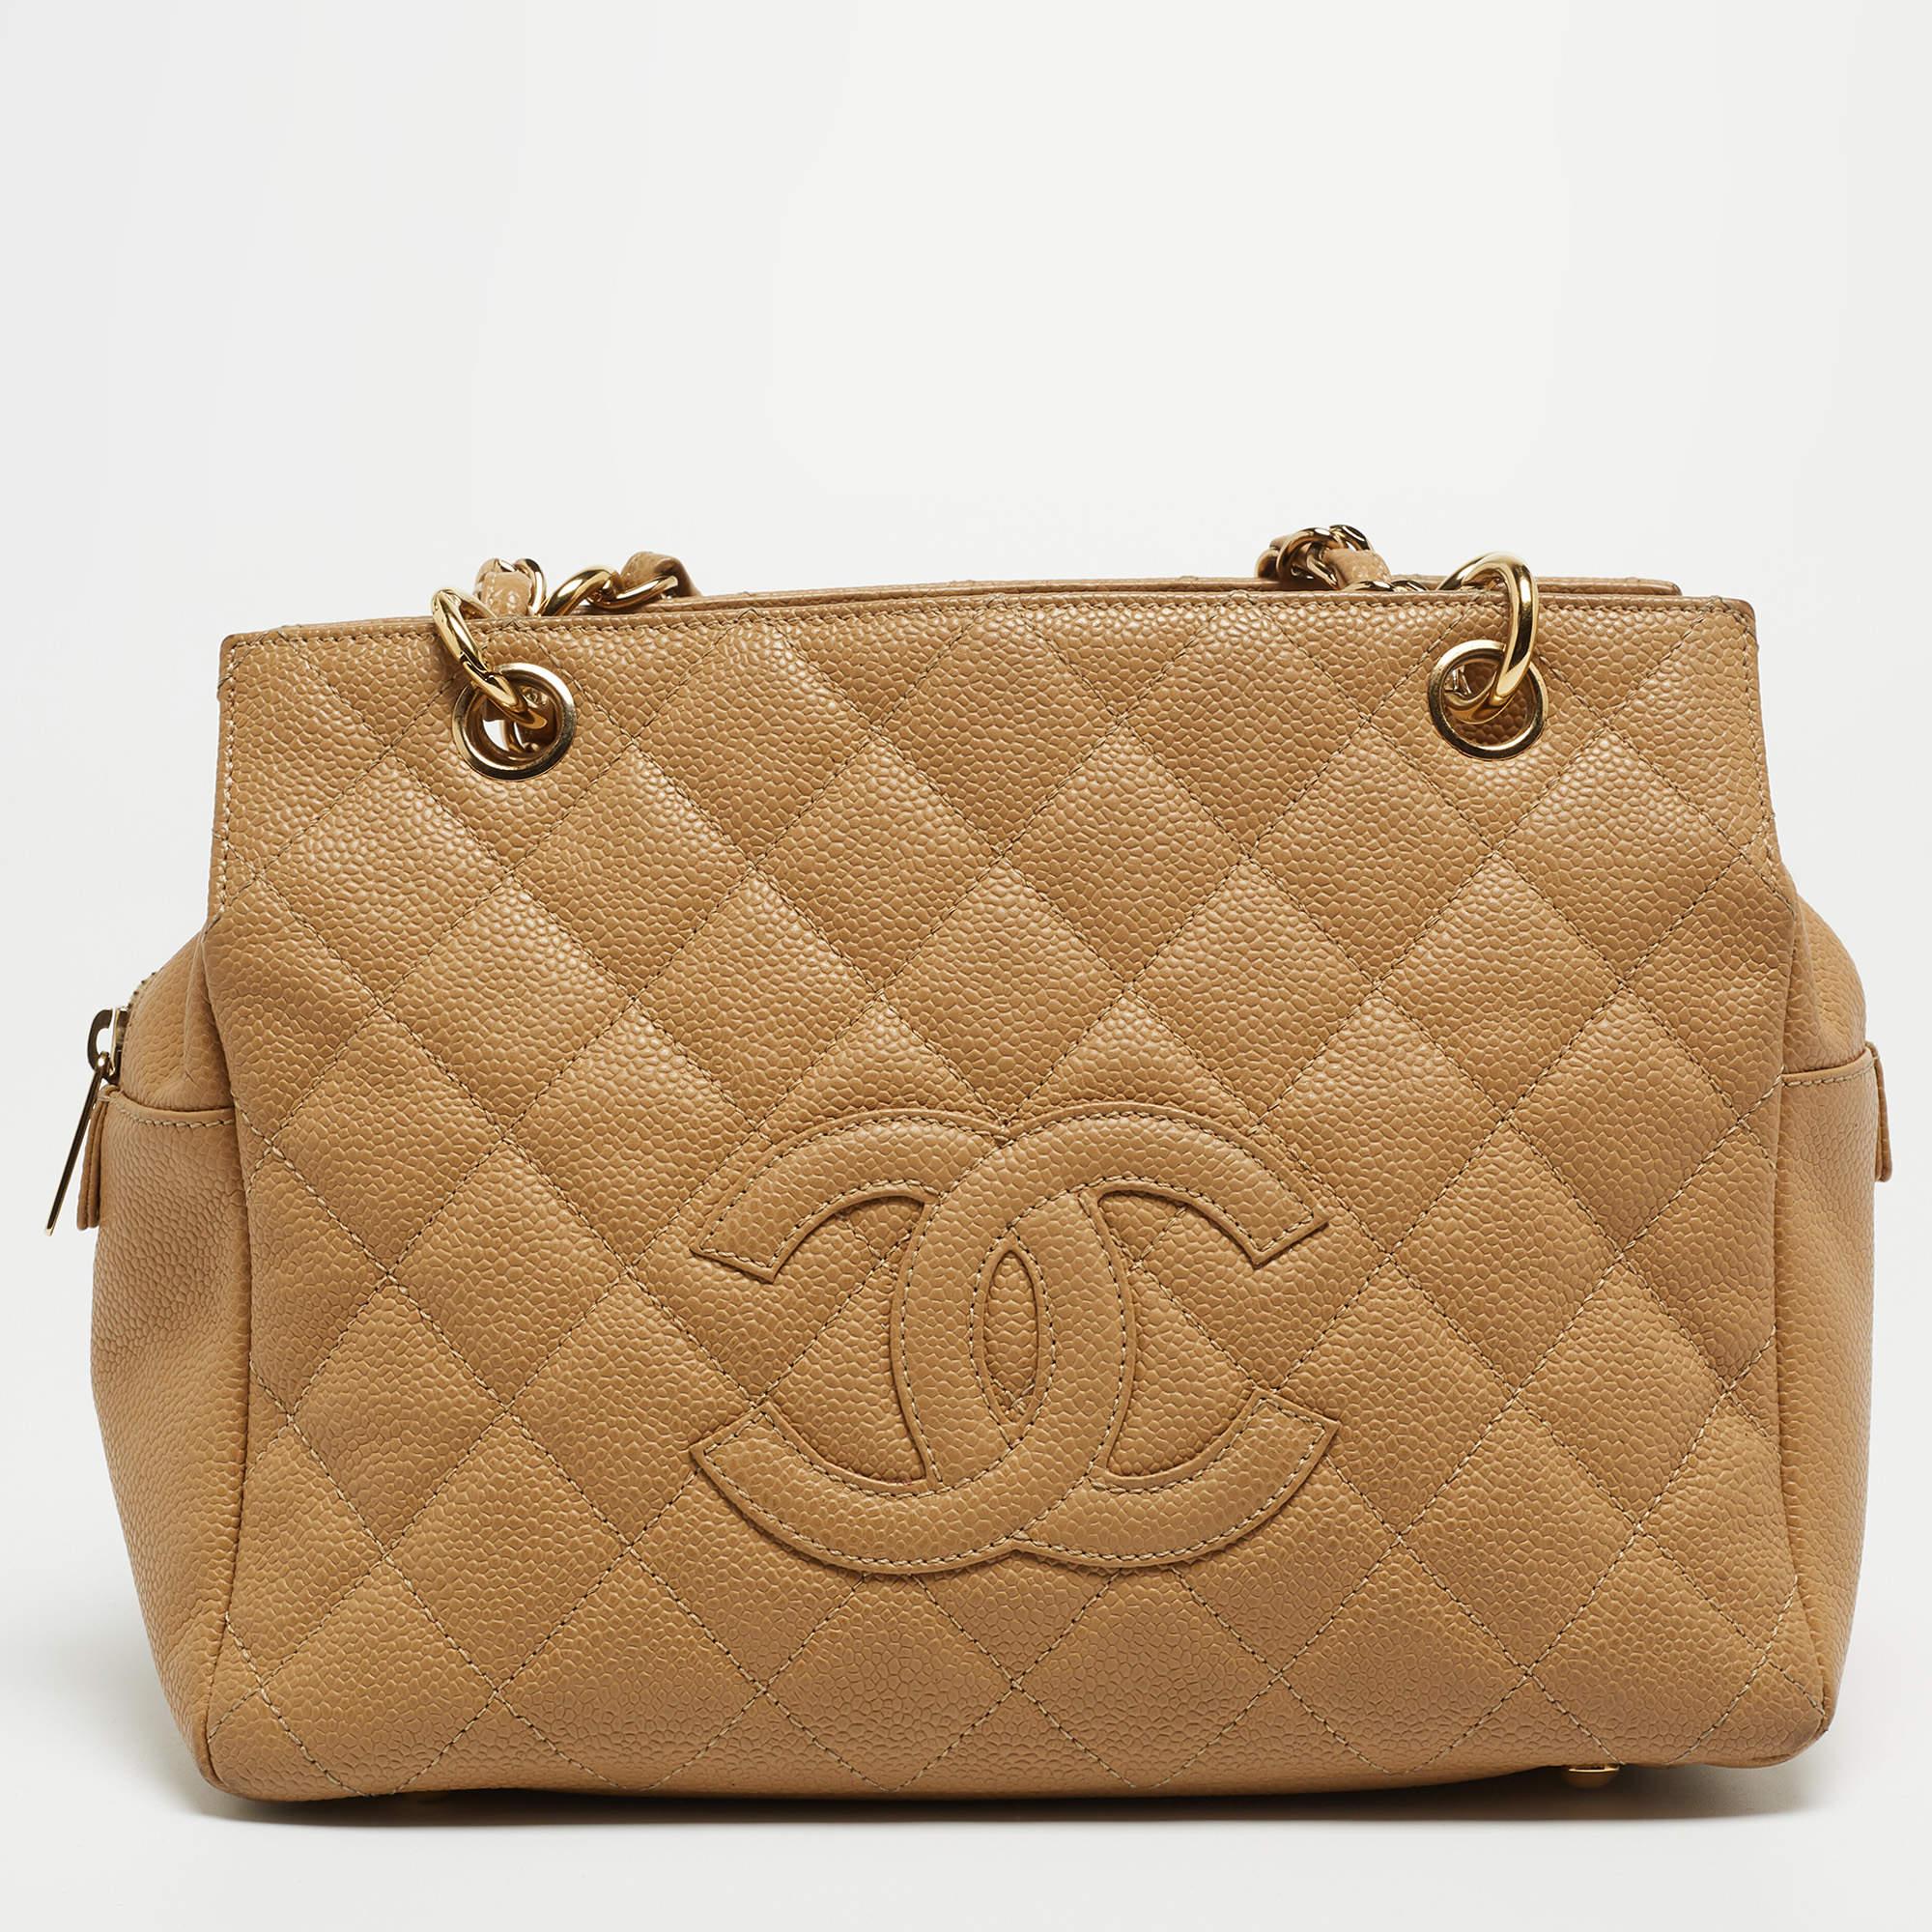 Chanel Beige Quilted Caviar Leather Petite Timeless Shopper Tote 2